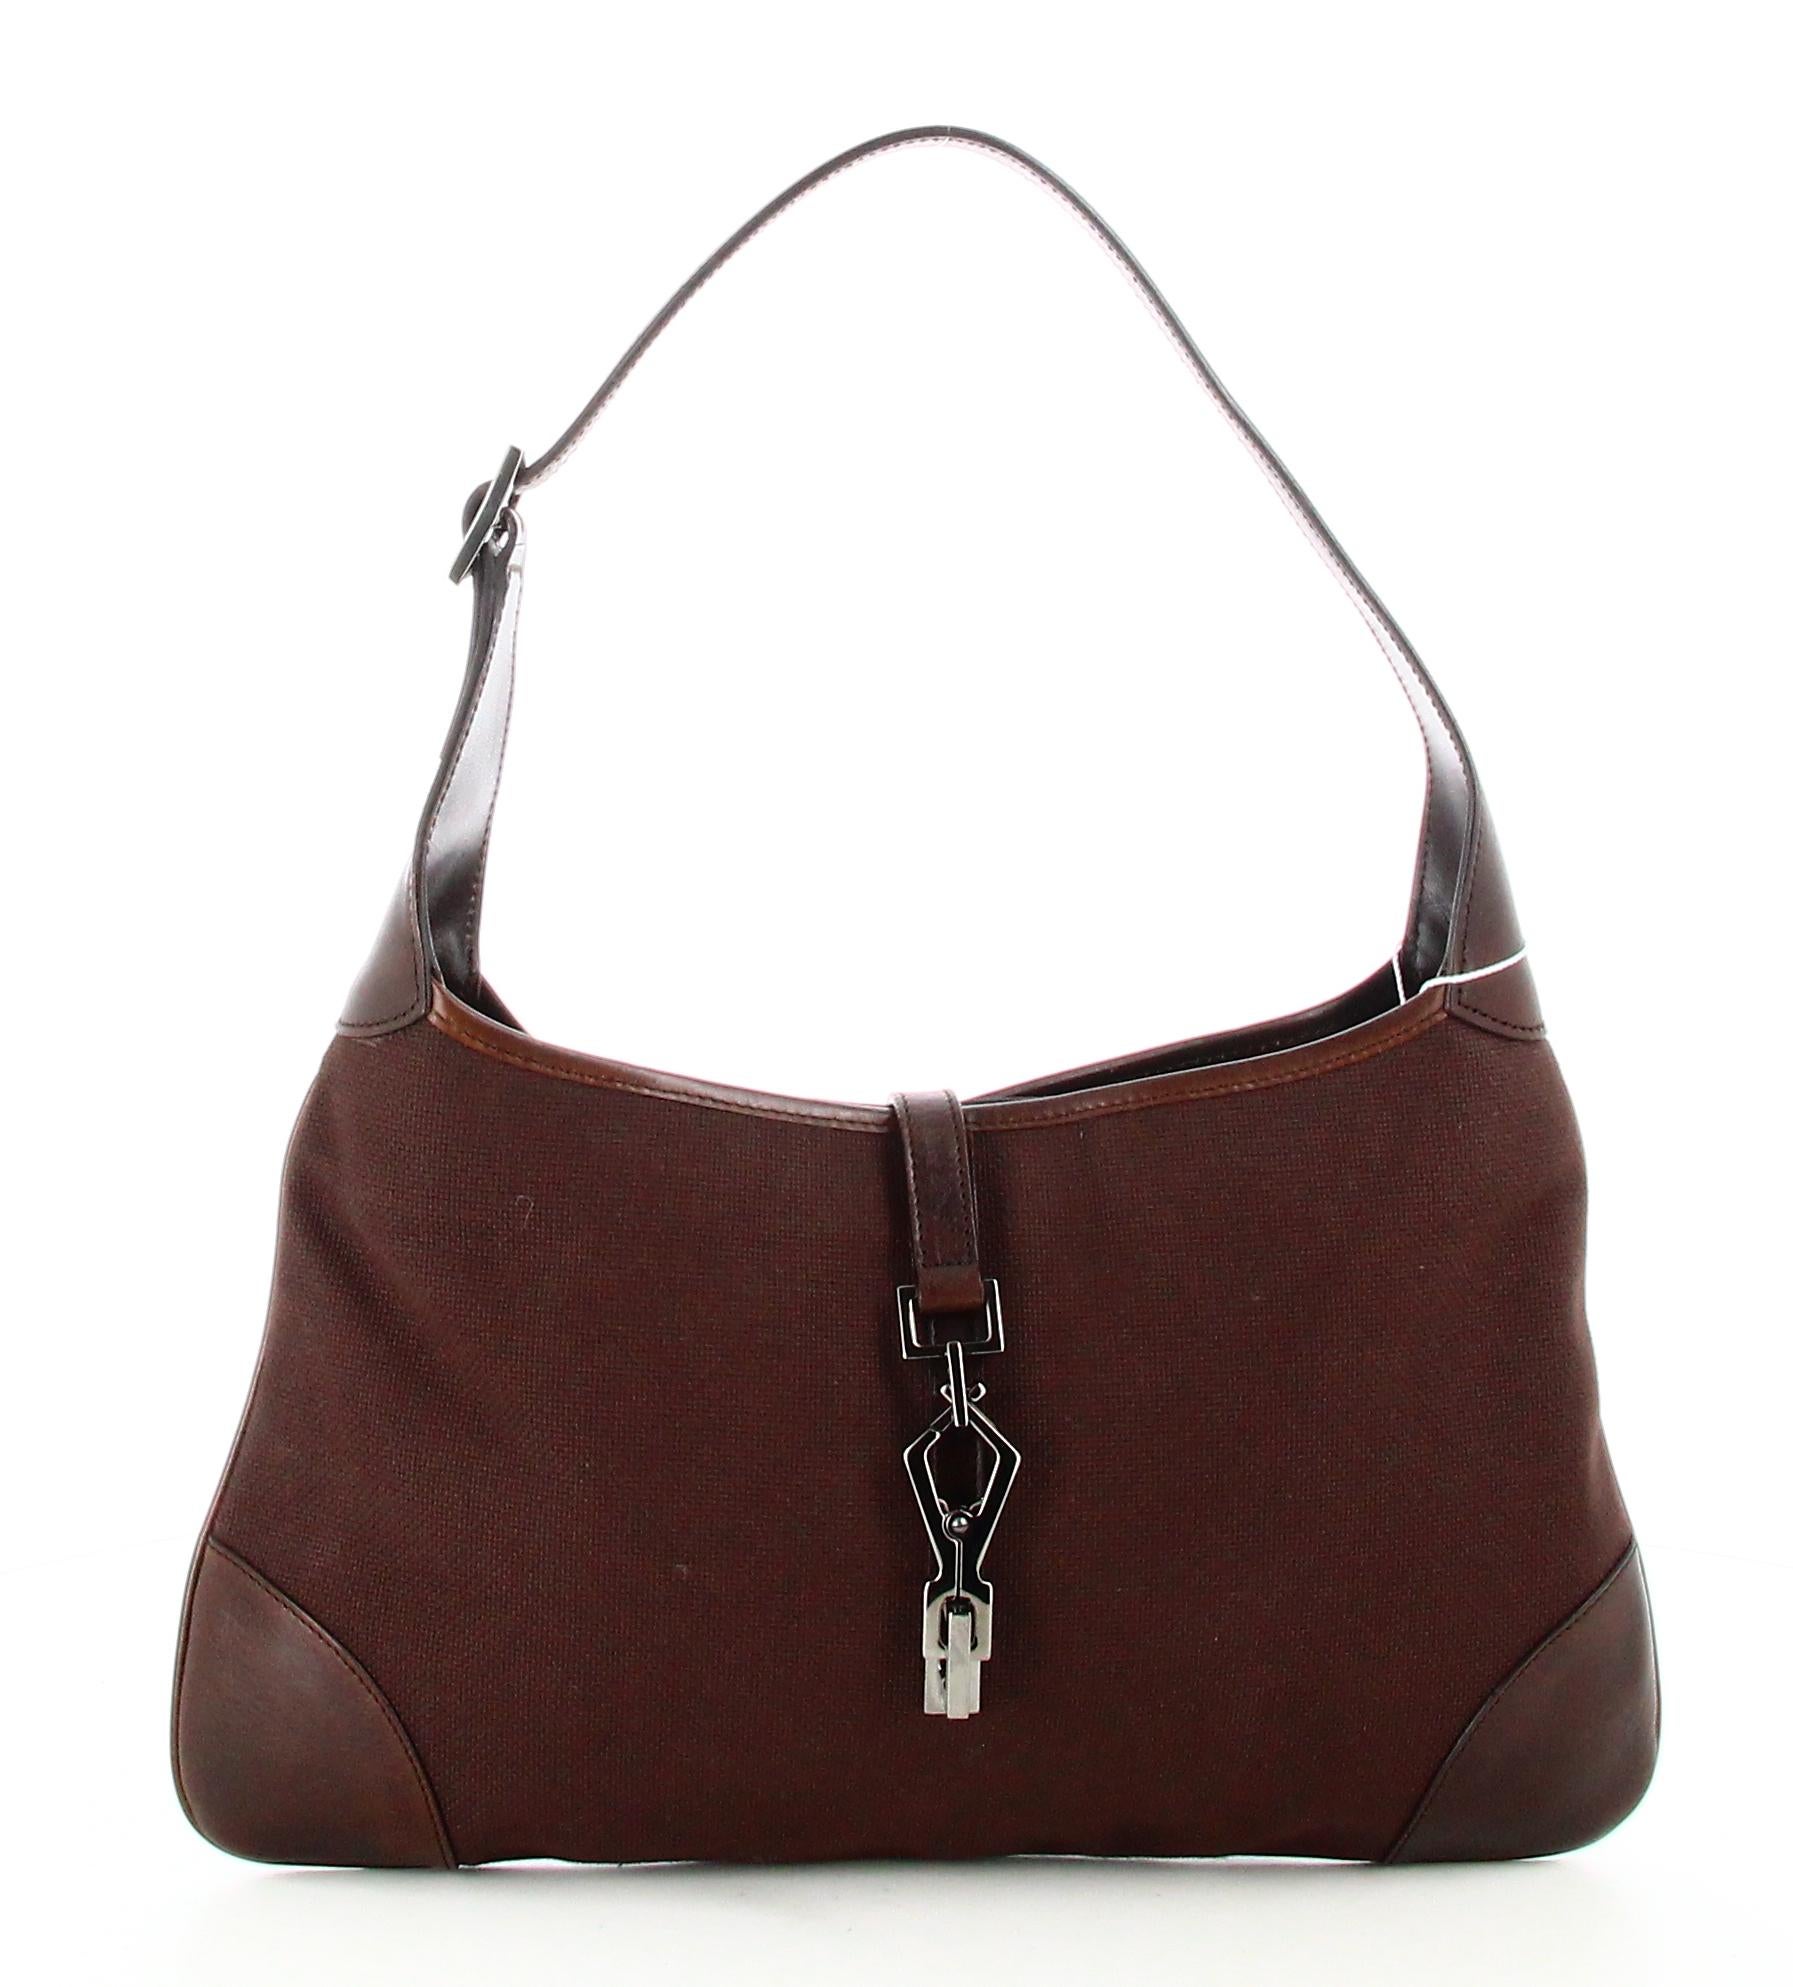 Jackie Gucci Canvas Shoulder Bag

- Very good condition. Shows very slight signs of wear over time. 
- Gucci Jackie Handbag
- Brown leather and brown fabric 
- Brown leather strap 
- Femroir : Silver hook
- Interior: Brown monogram lining plus